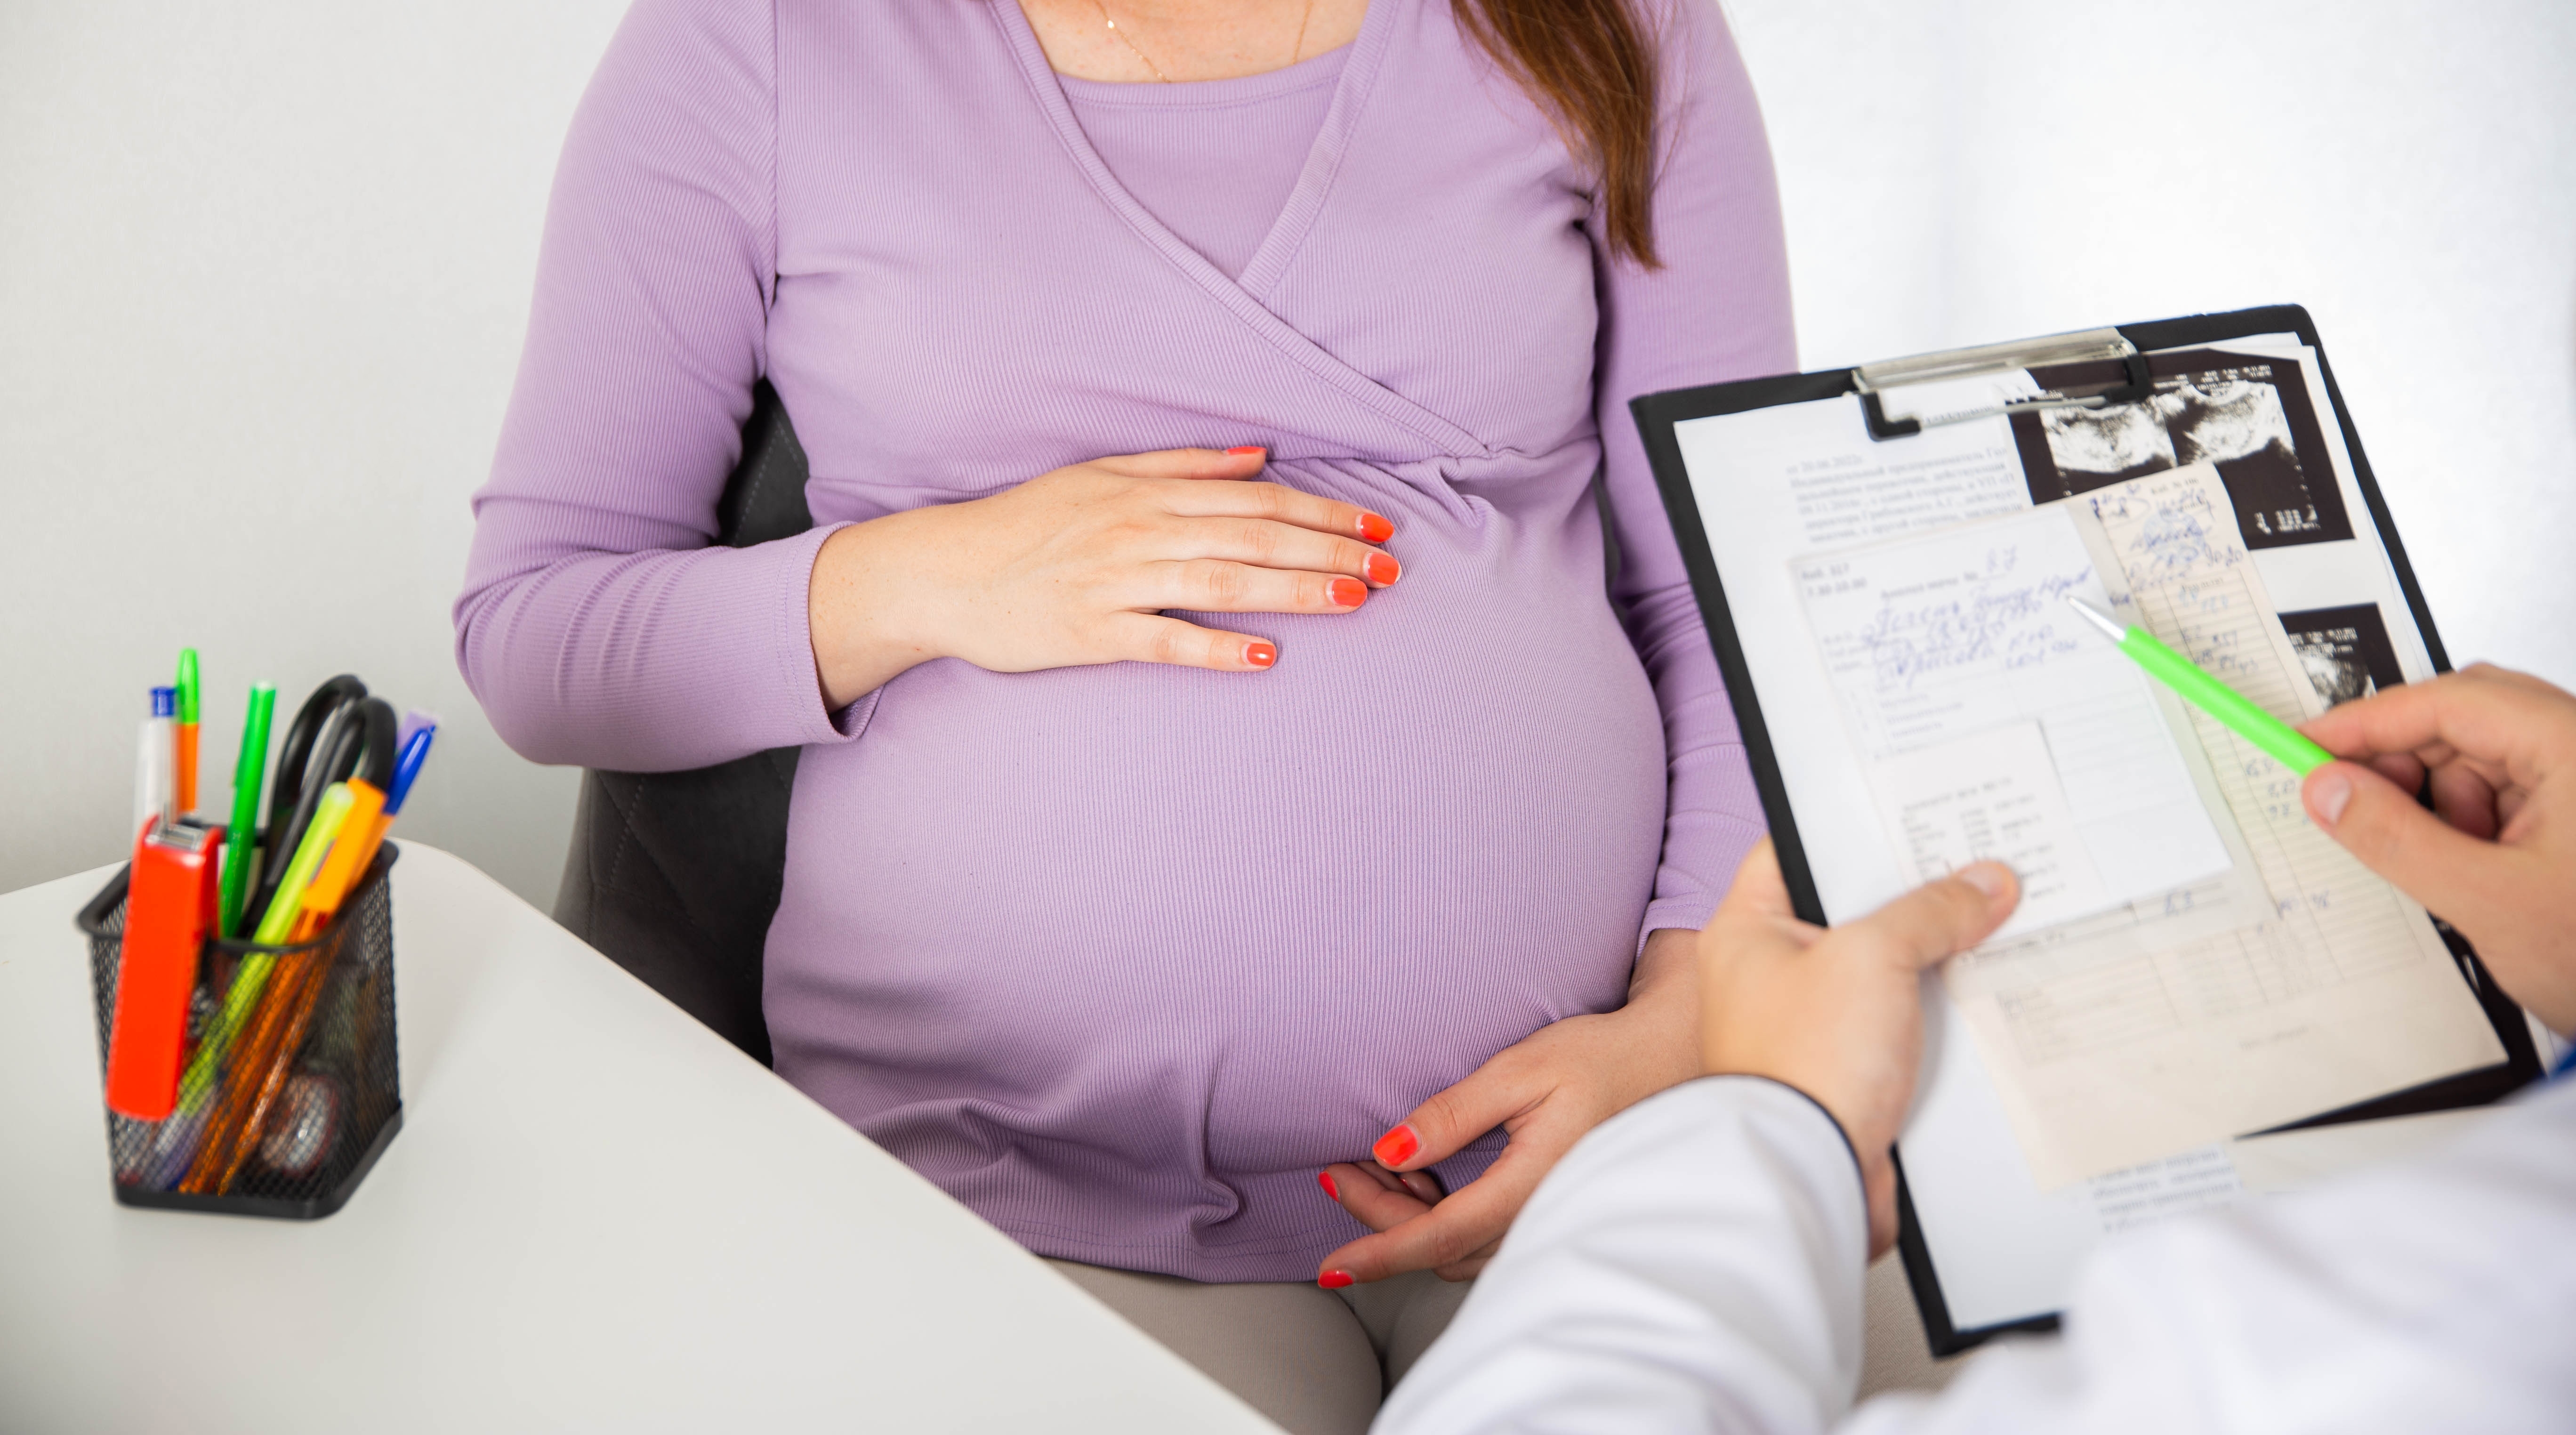 A pregnant woman sat with a doctor going through notes